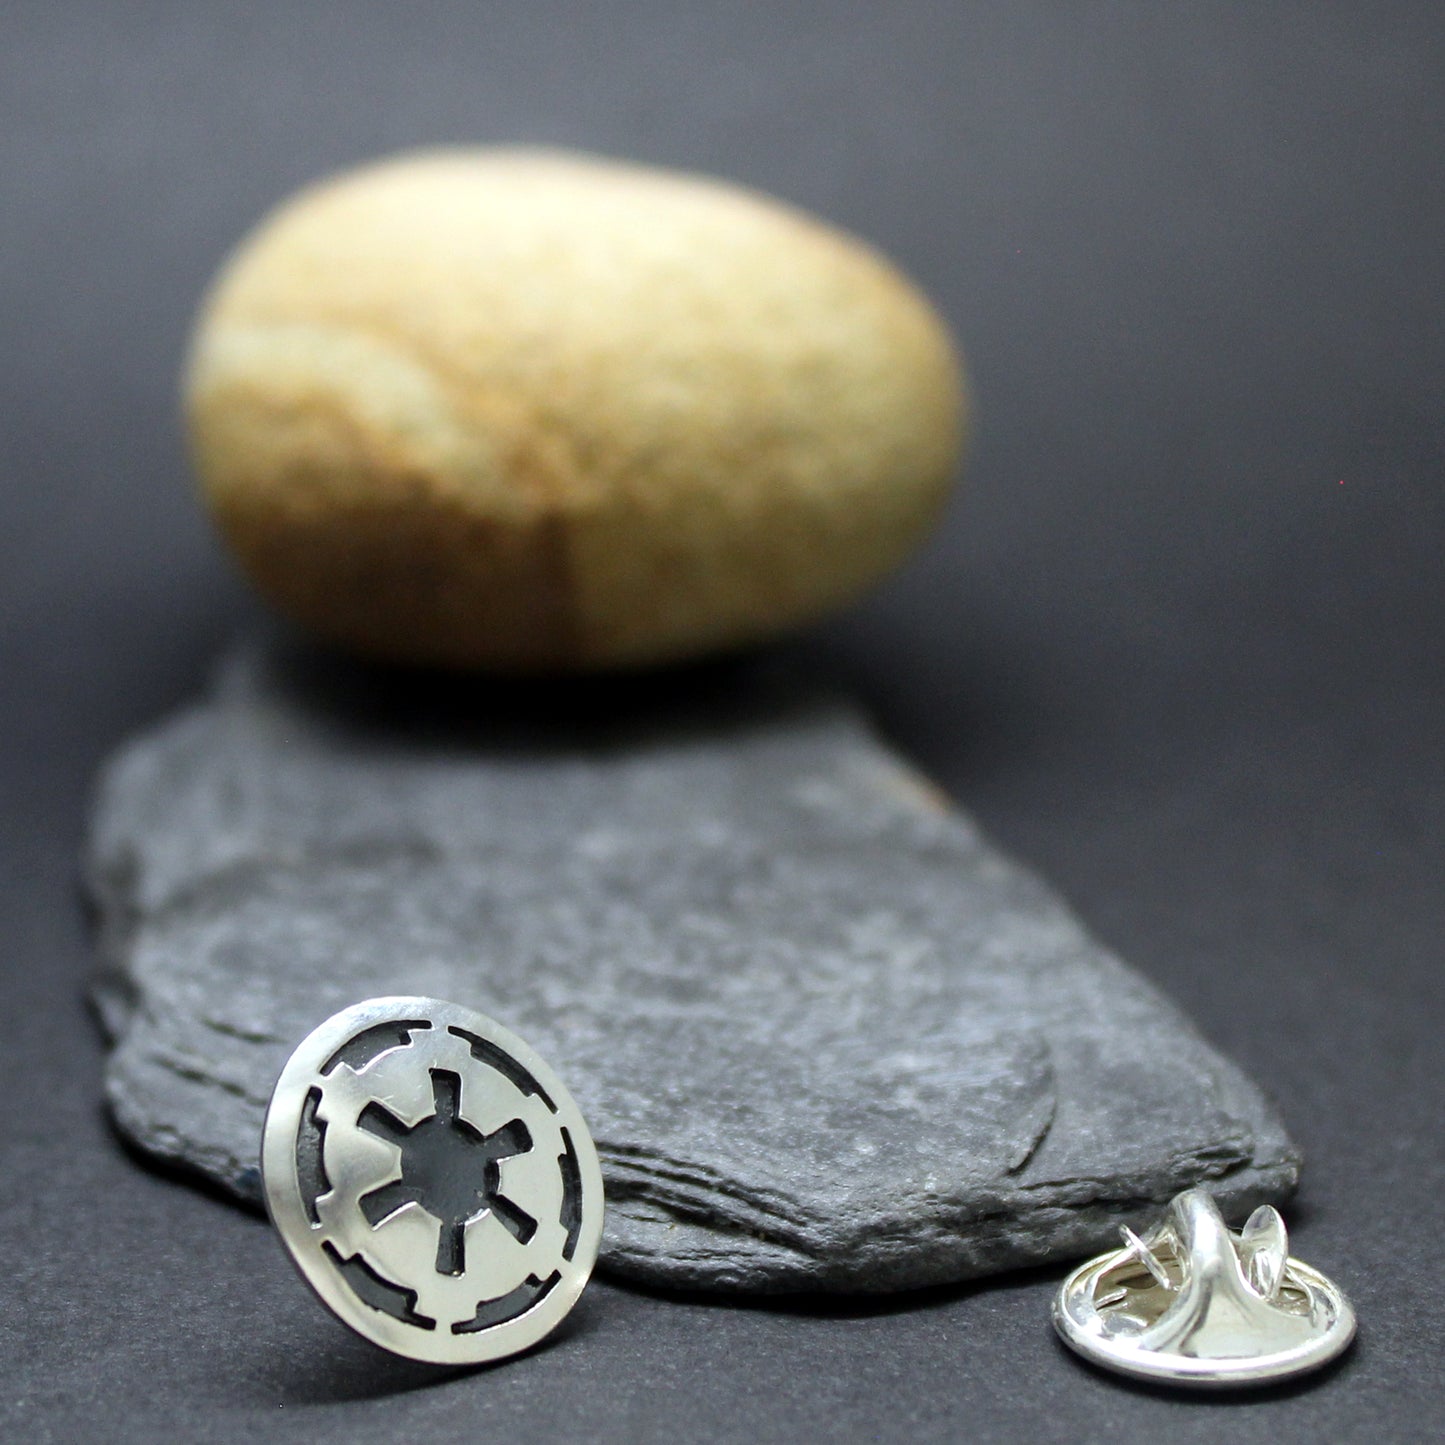 Symbol of the Galactic Empire Star Wars pin in 925 silver